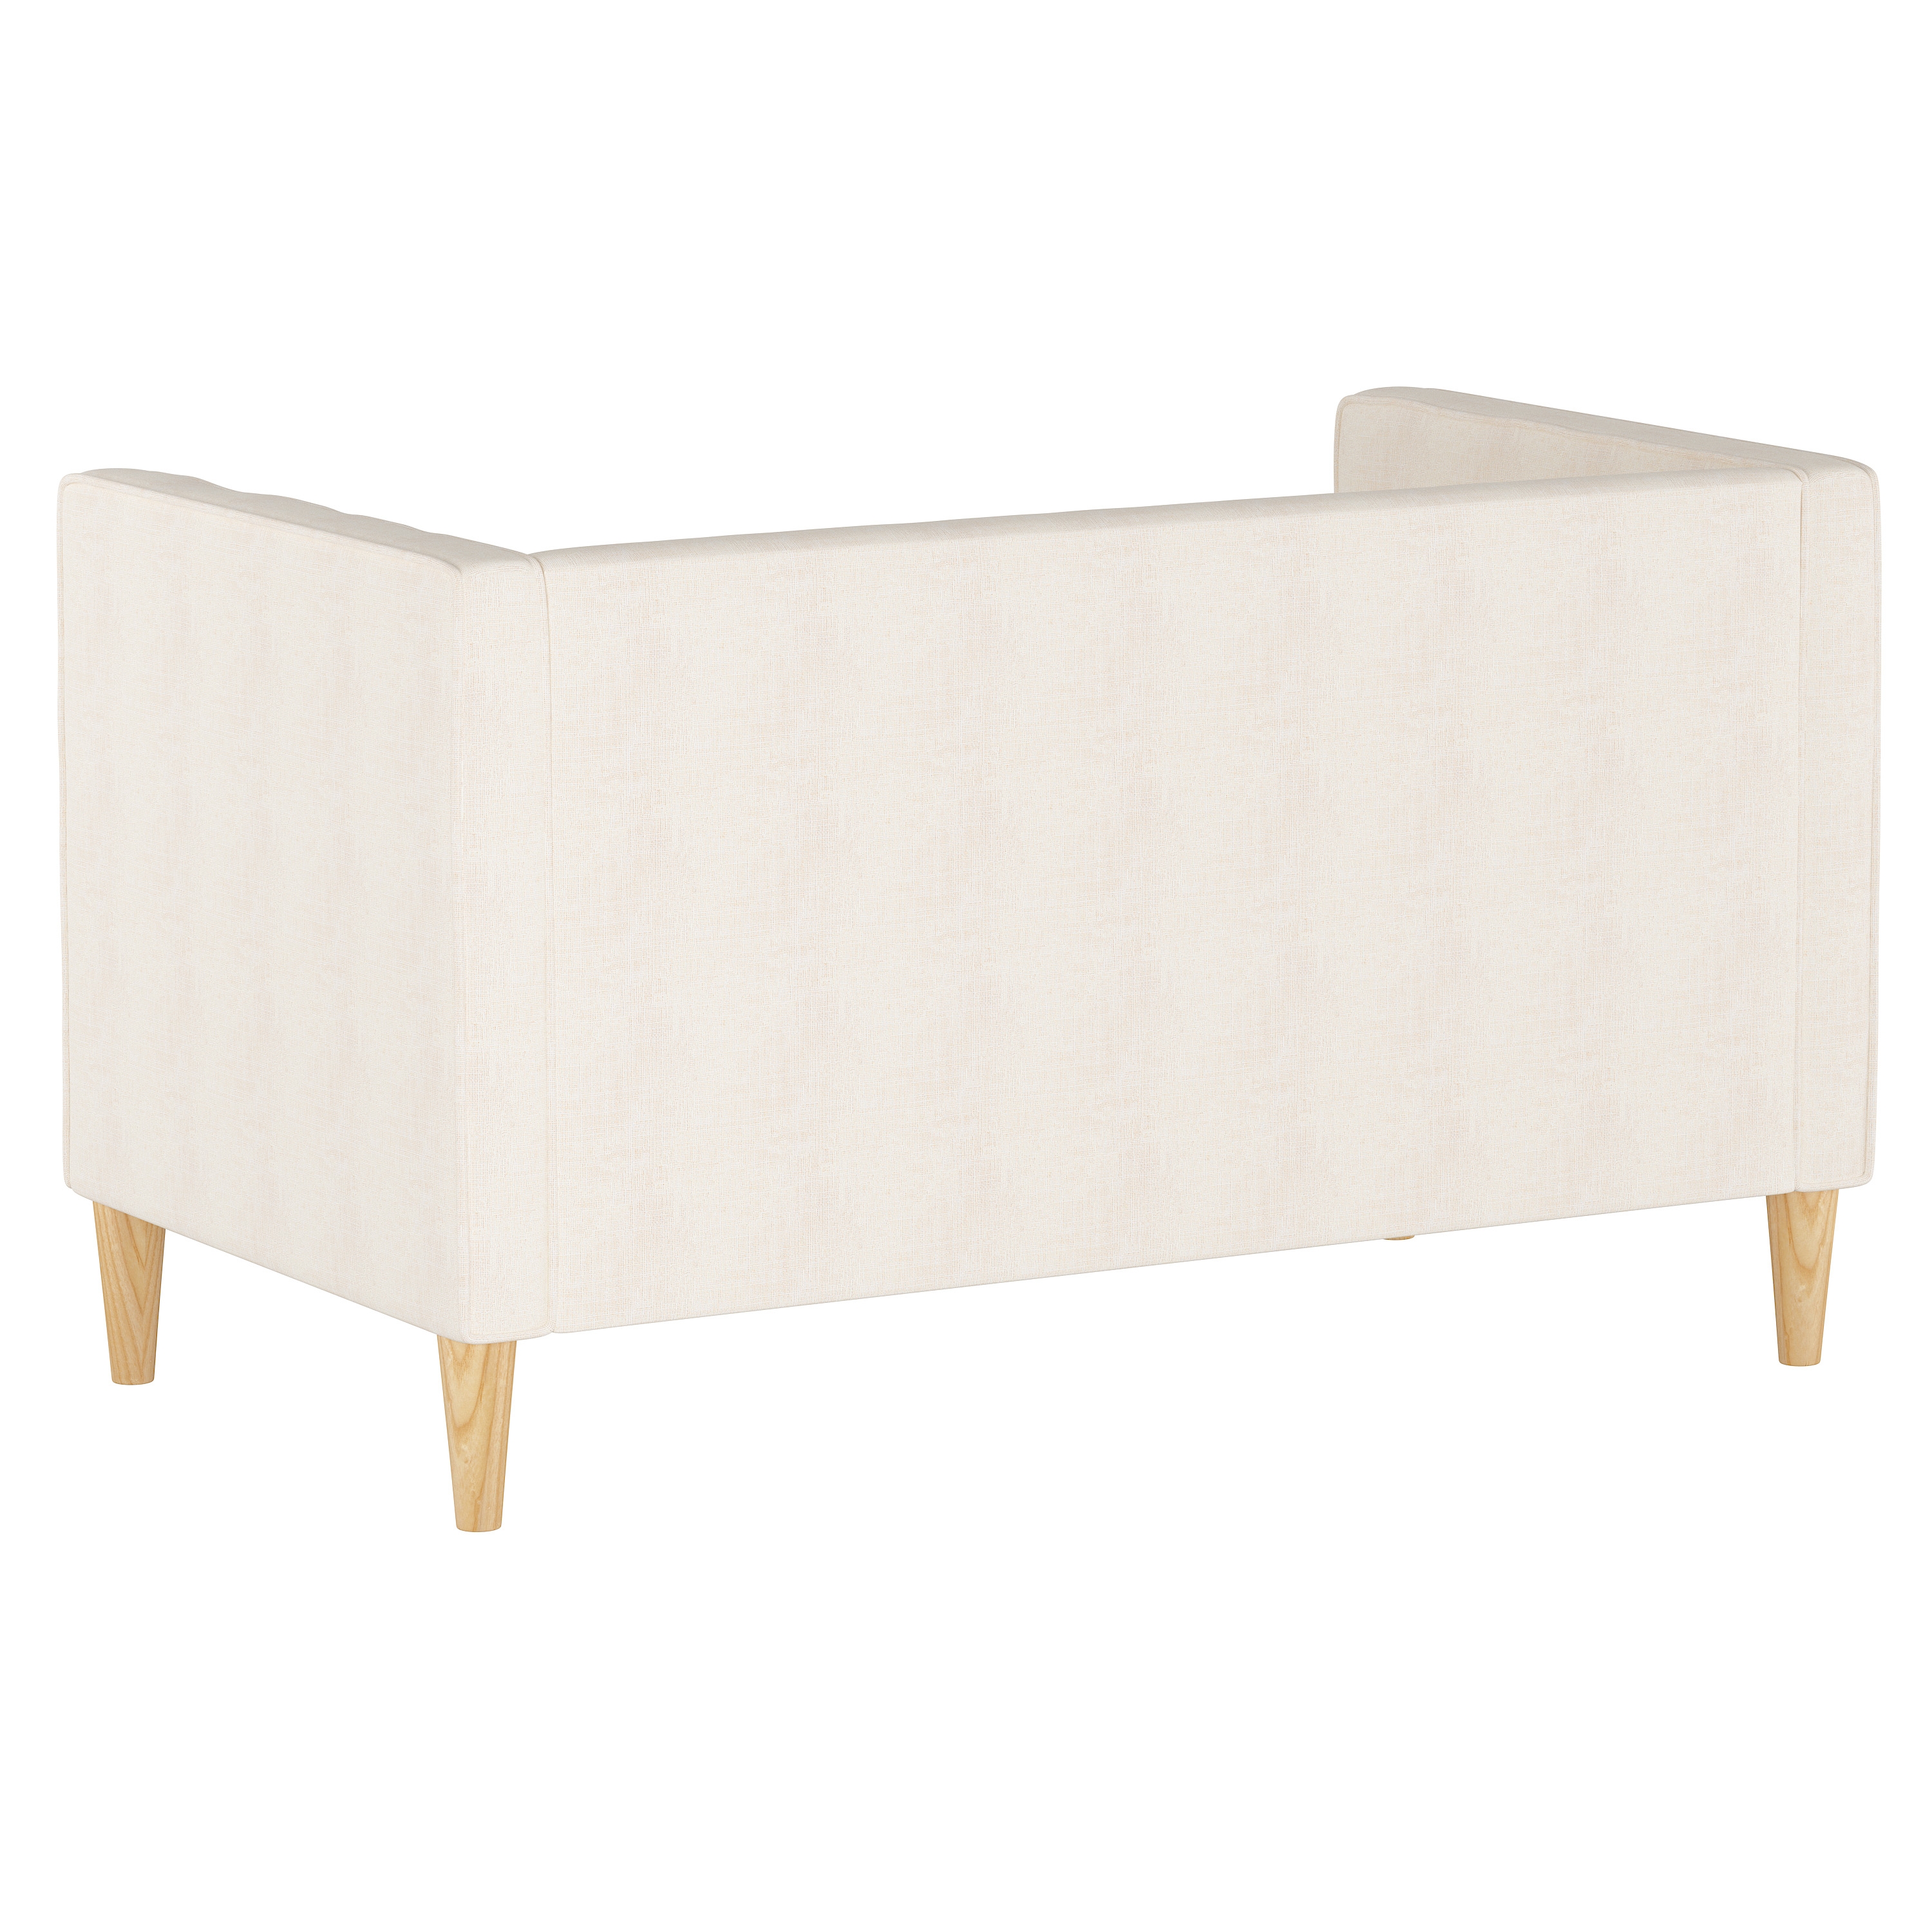 Downing Settee, White - DNU - Image 3